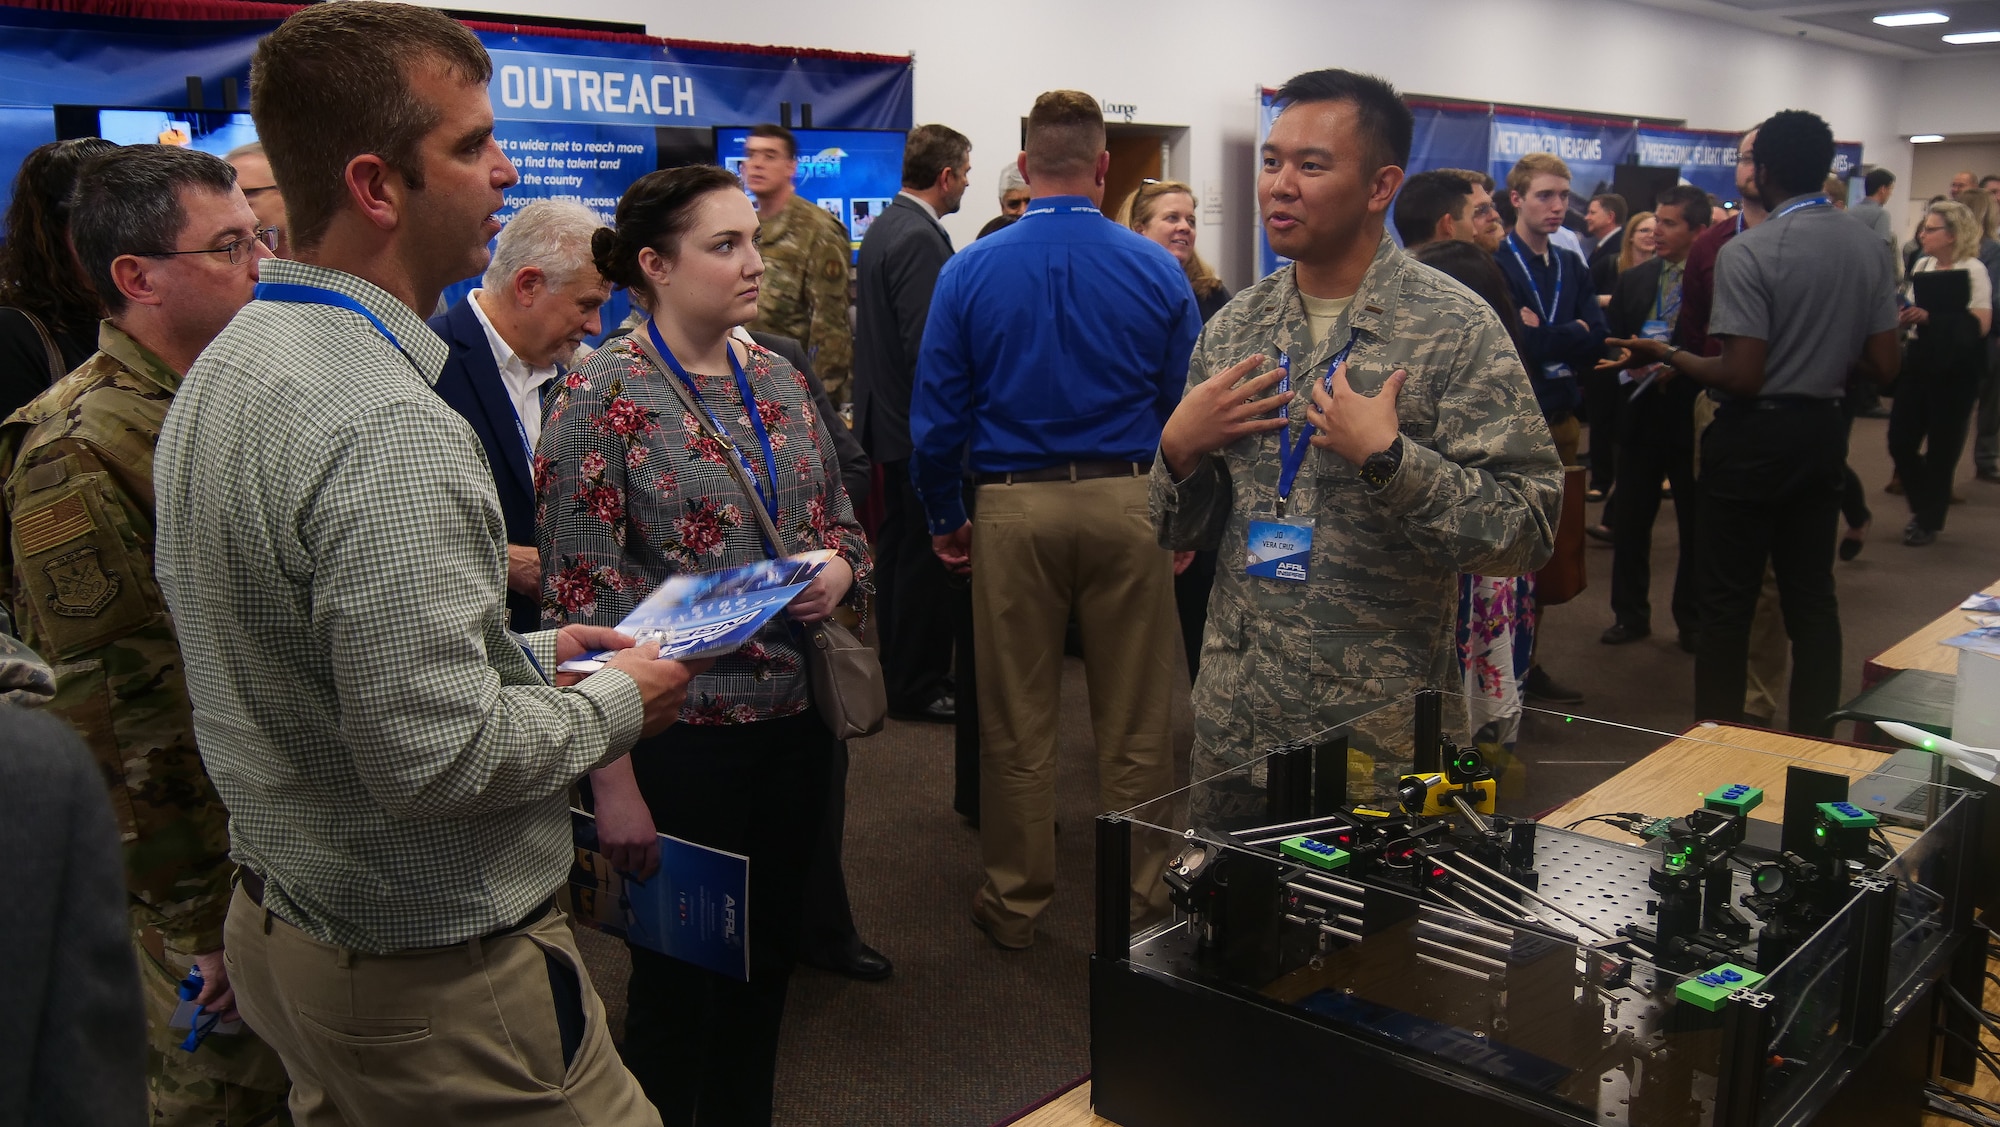 2nd Lt. J.D. Vela Cruz, an laser weapons & aerodynamics engineer from AFRL’s Directed Energy Directorate, explains how directed energy amplifies speed, range, precision and accuracy to attendees at the AFRL 2019 Tech Expo event. (U.S. Air Force photo/Keith Lewis)